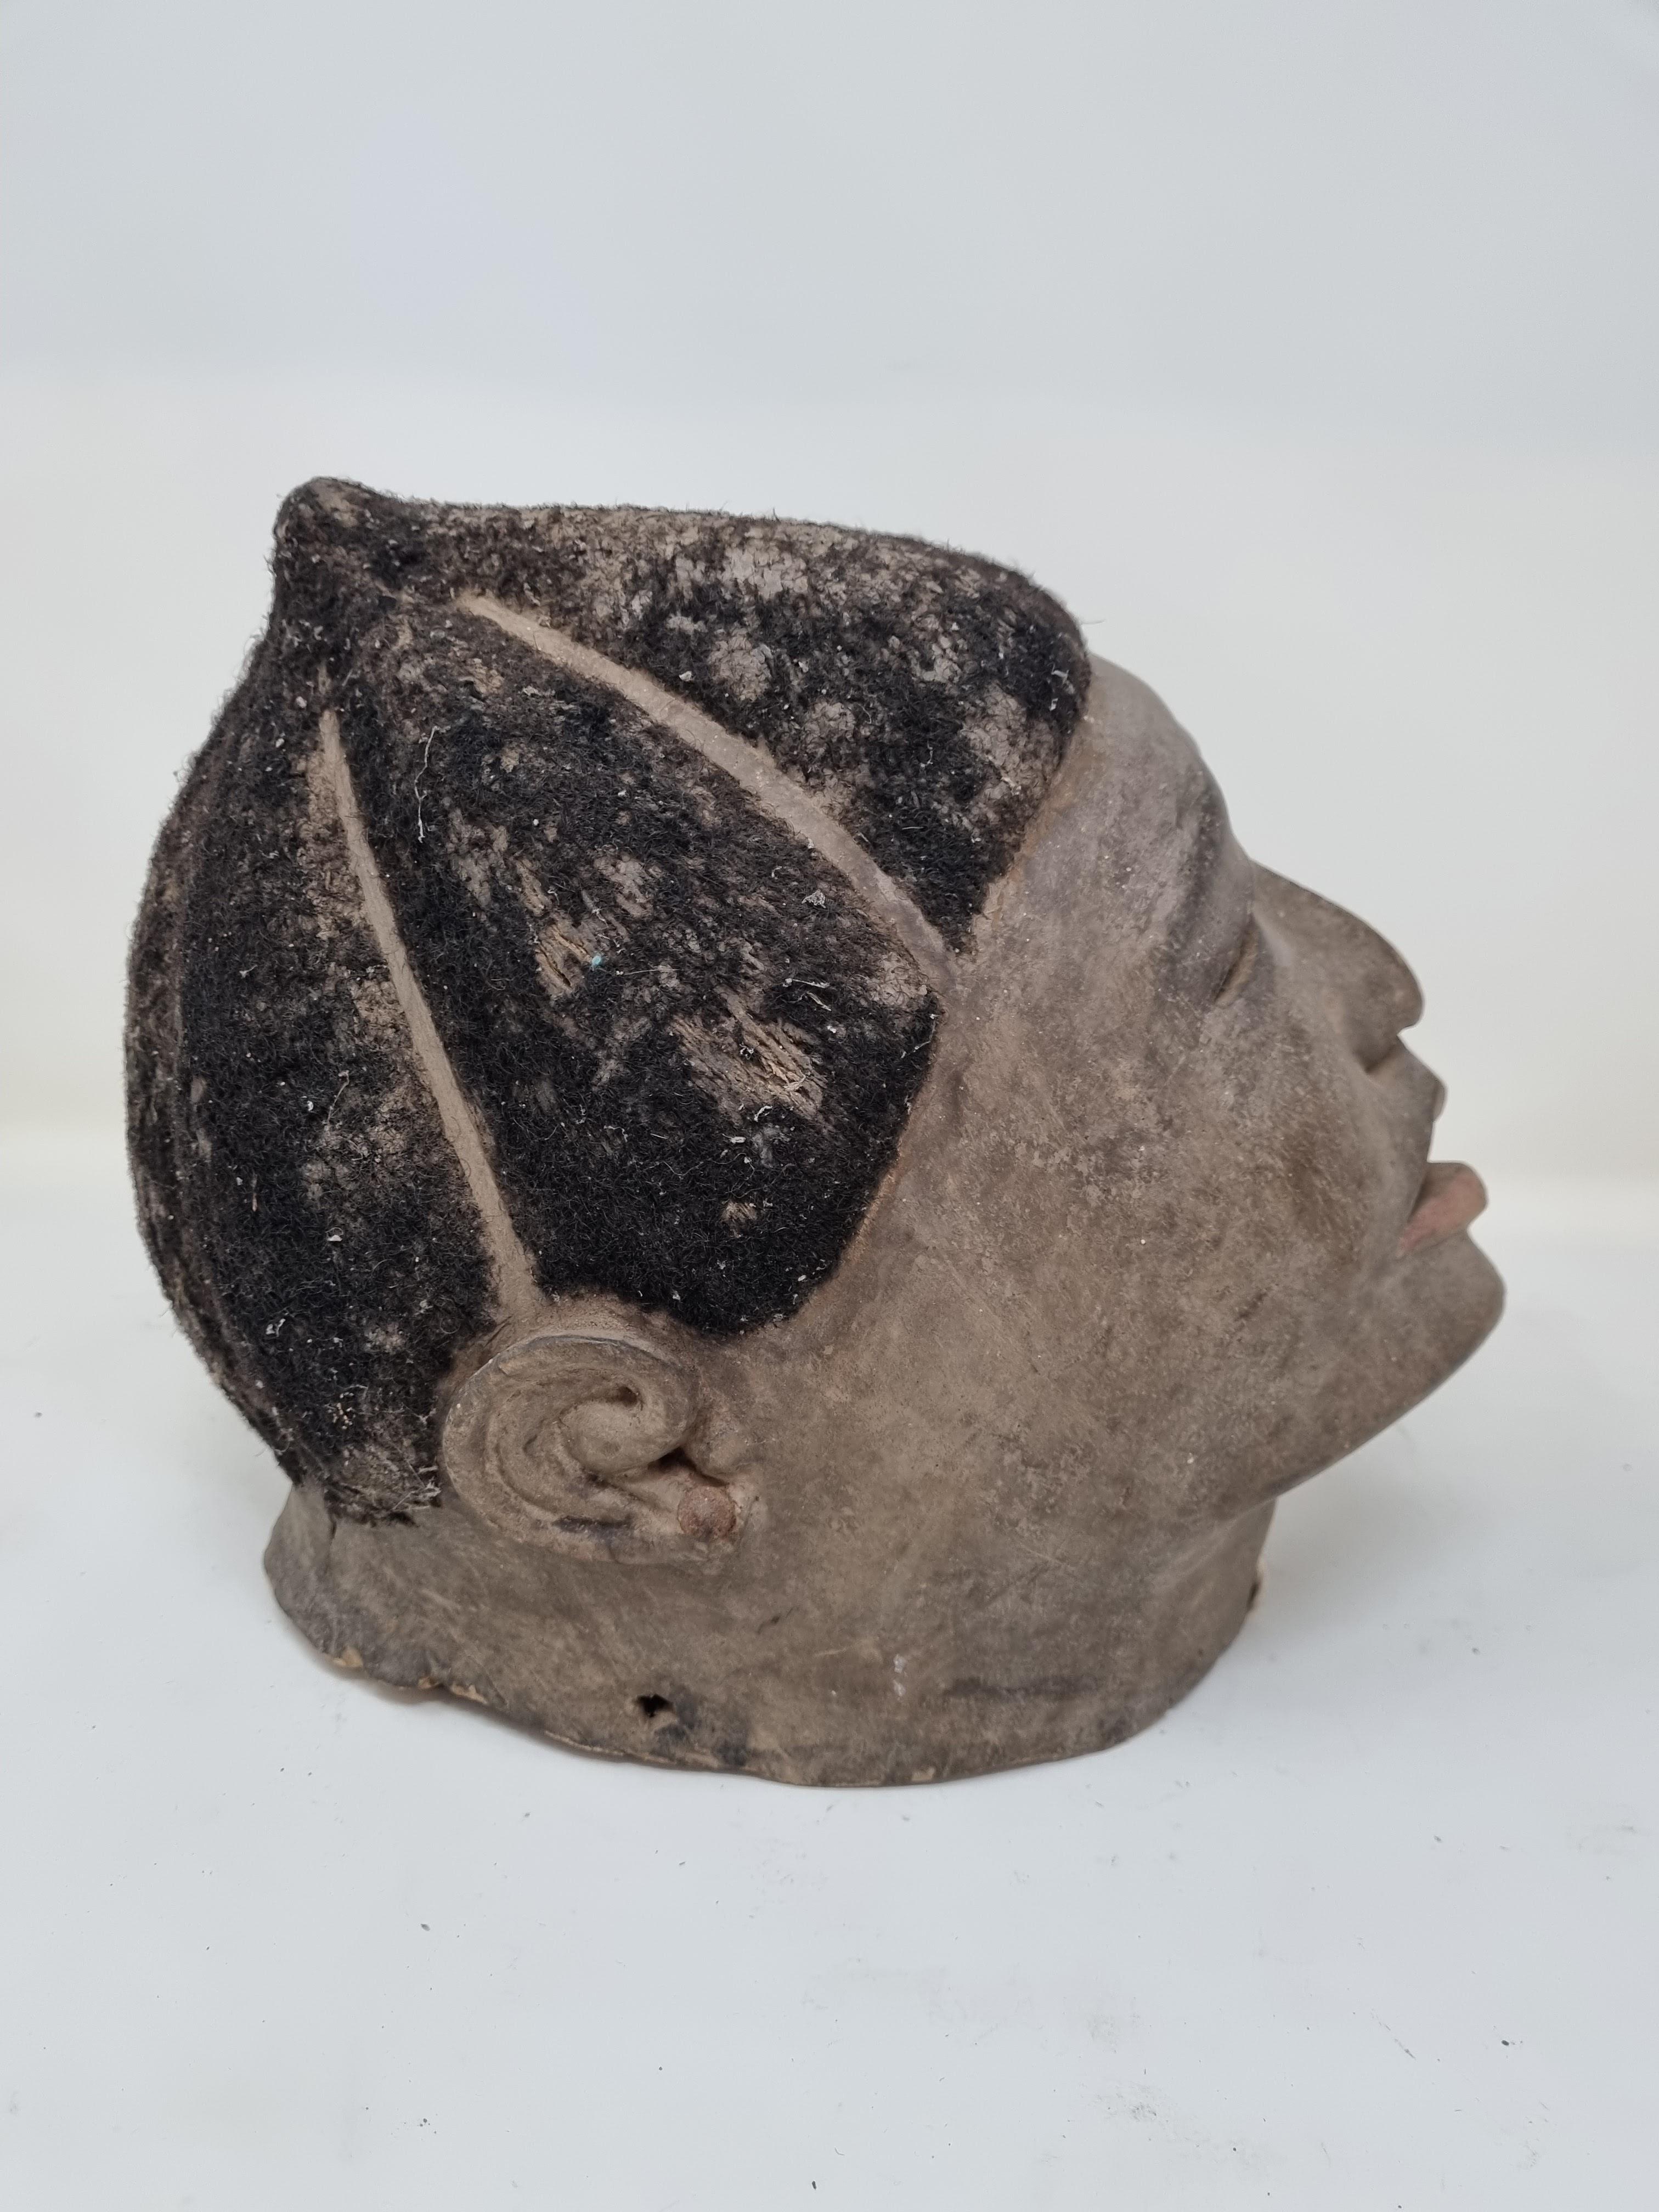 Makonde mask with delicate features.
North East of Mozambique 1950s.